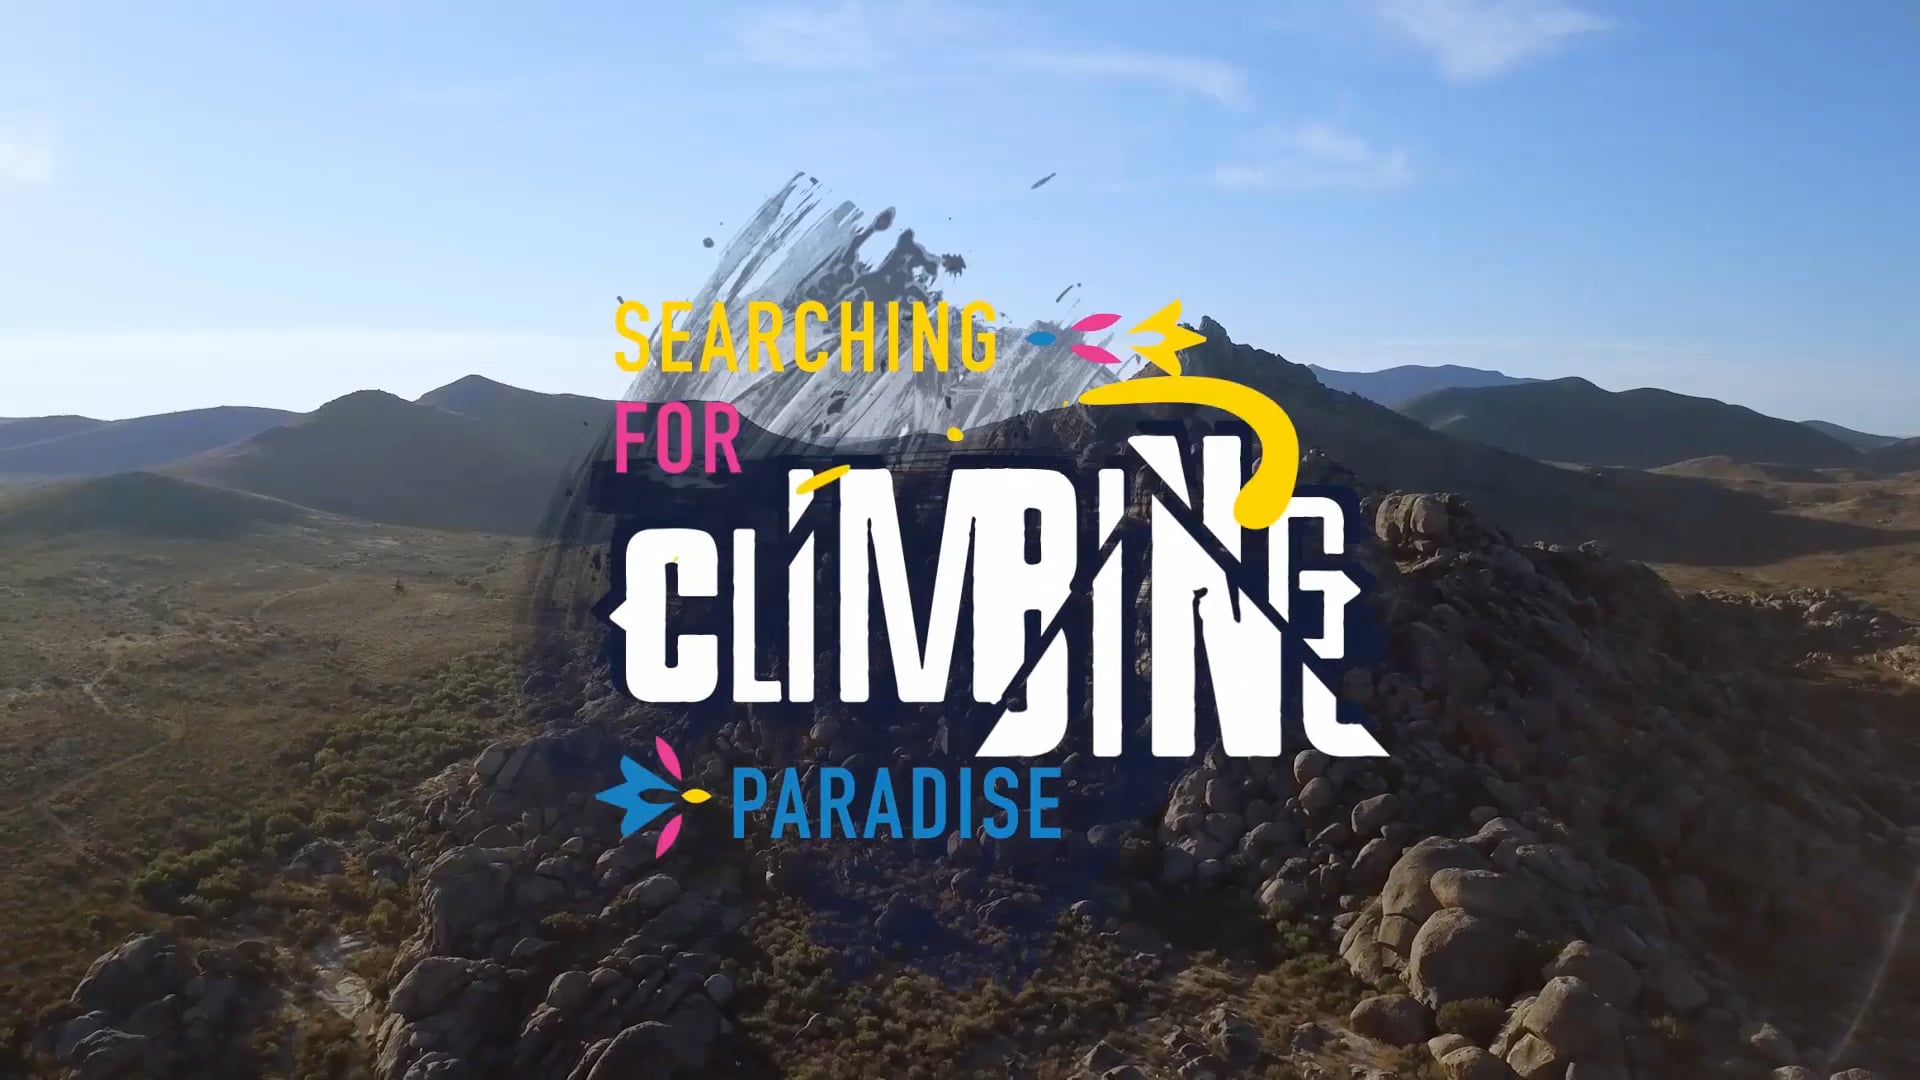 Searching for Climbing Paradise. Teaser